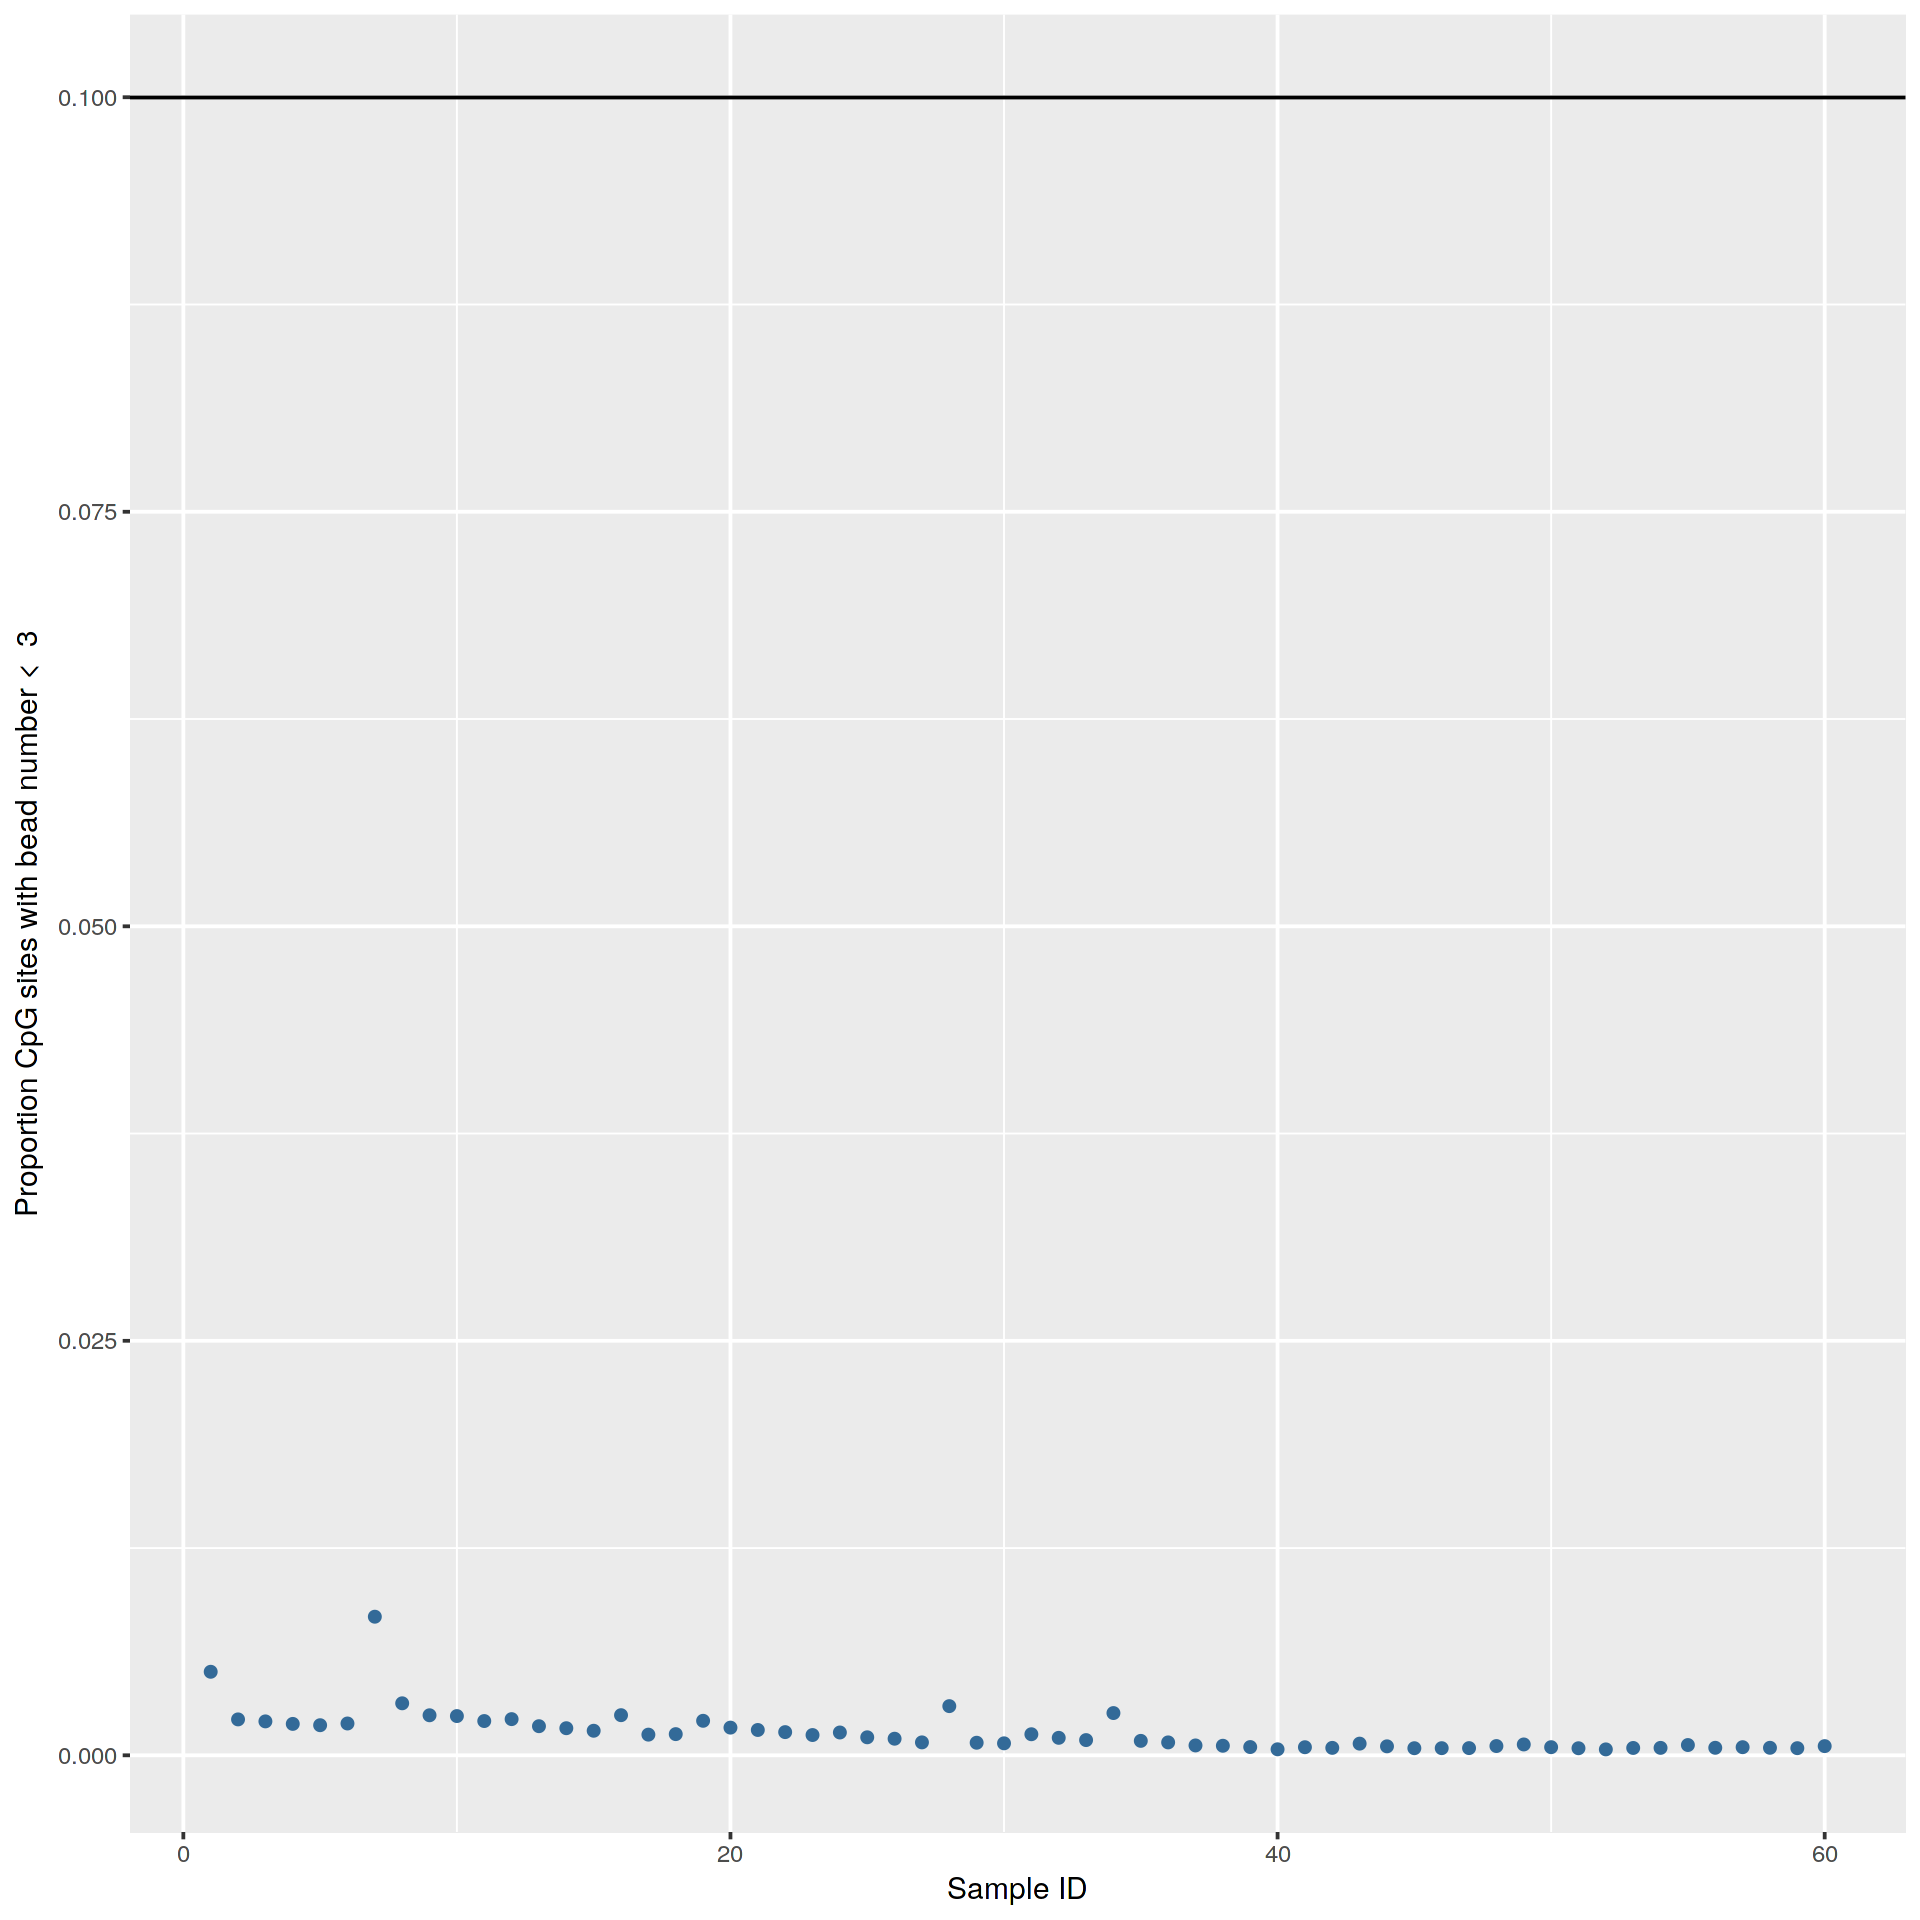 Proportion of probes with a bead count of < 3 by sample for the 450k array data. Black line indicates the exclusion threshold of 0.1. Plot generated by meffil QC report.